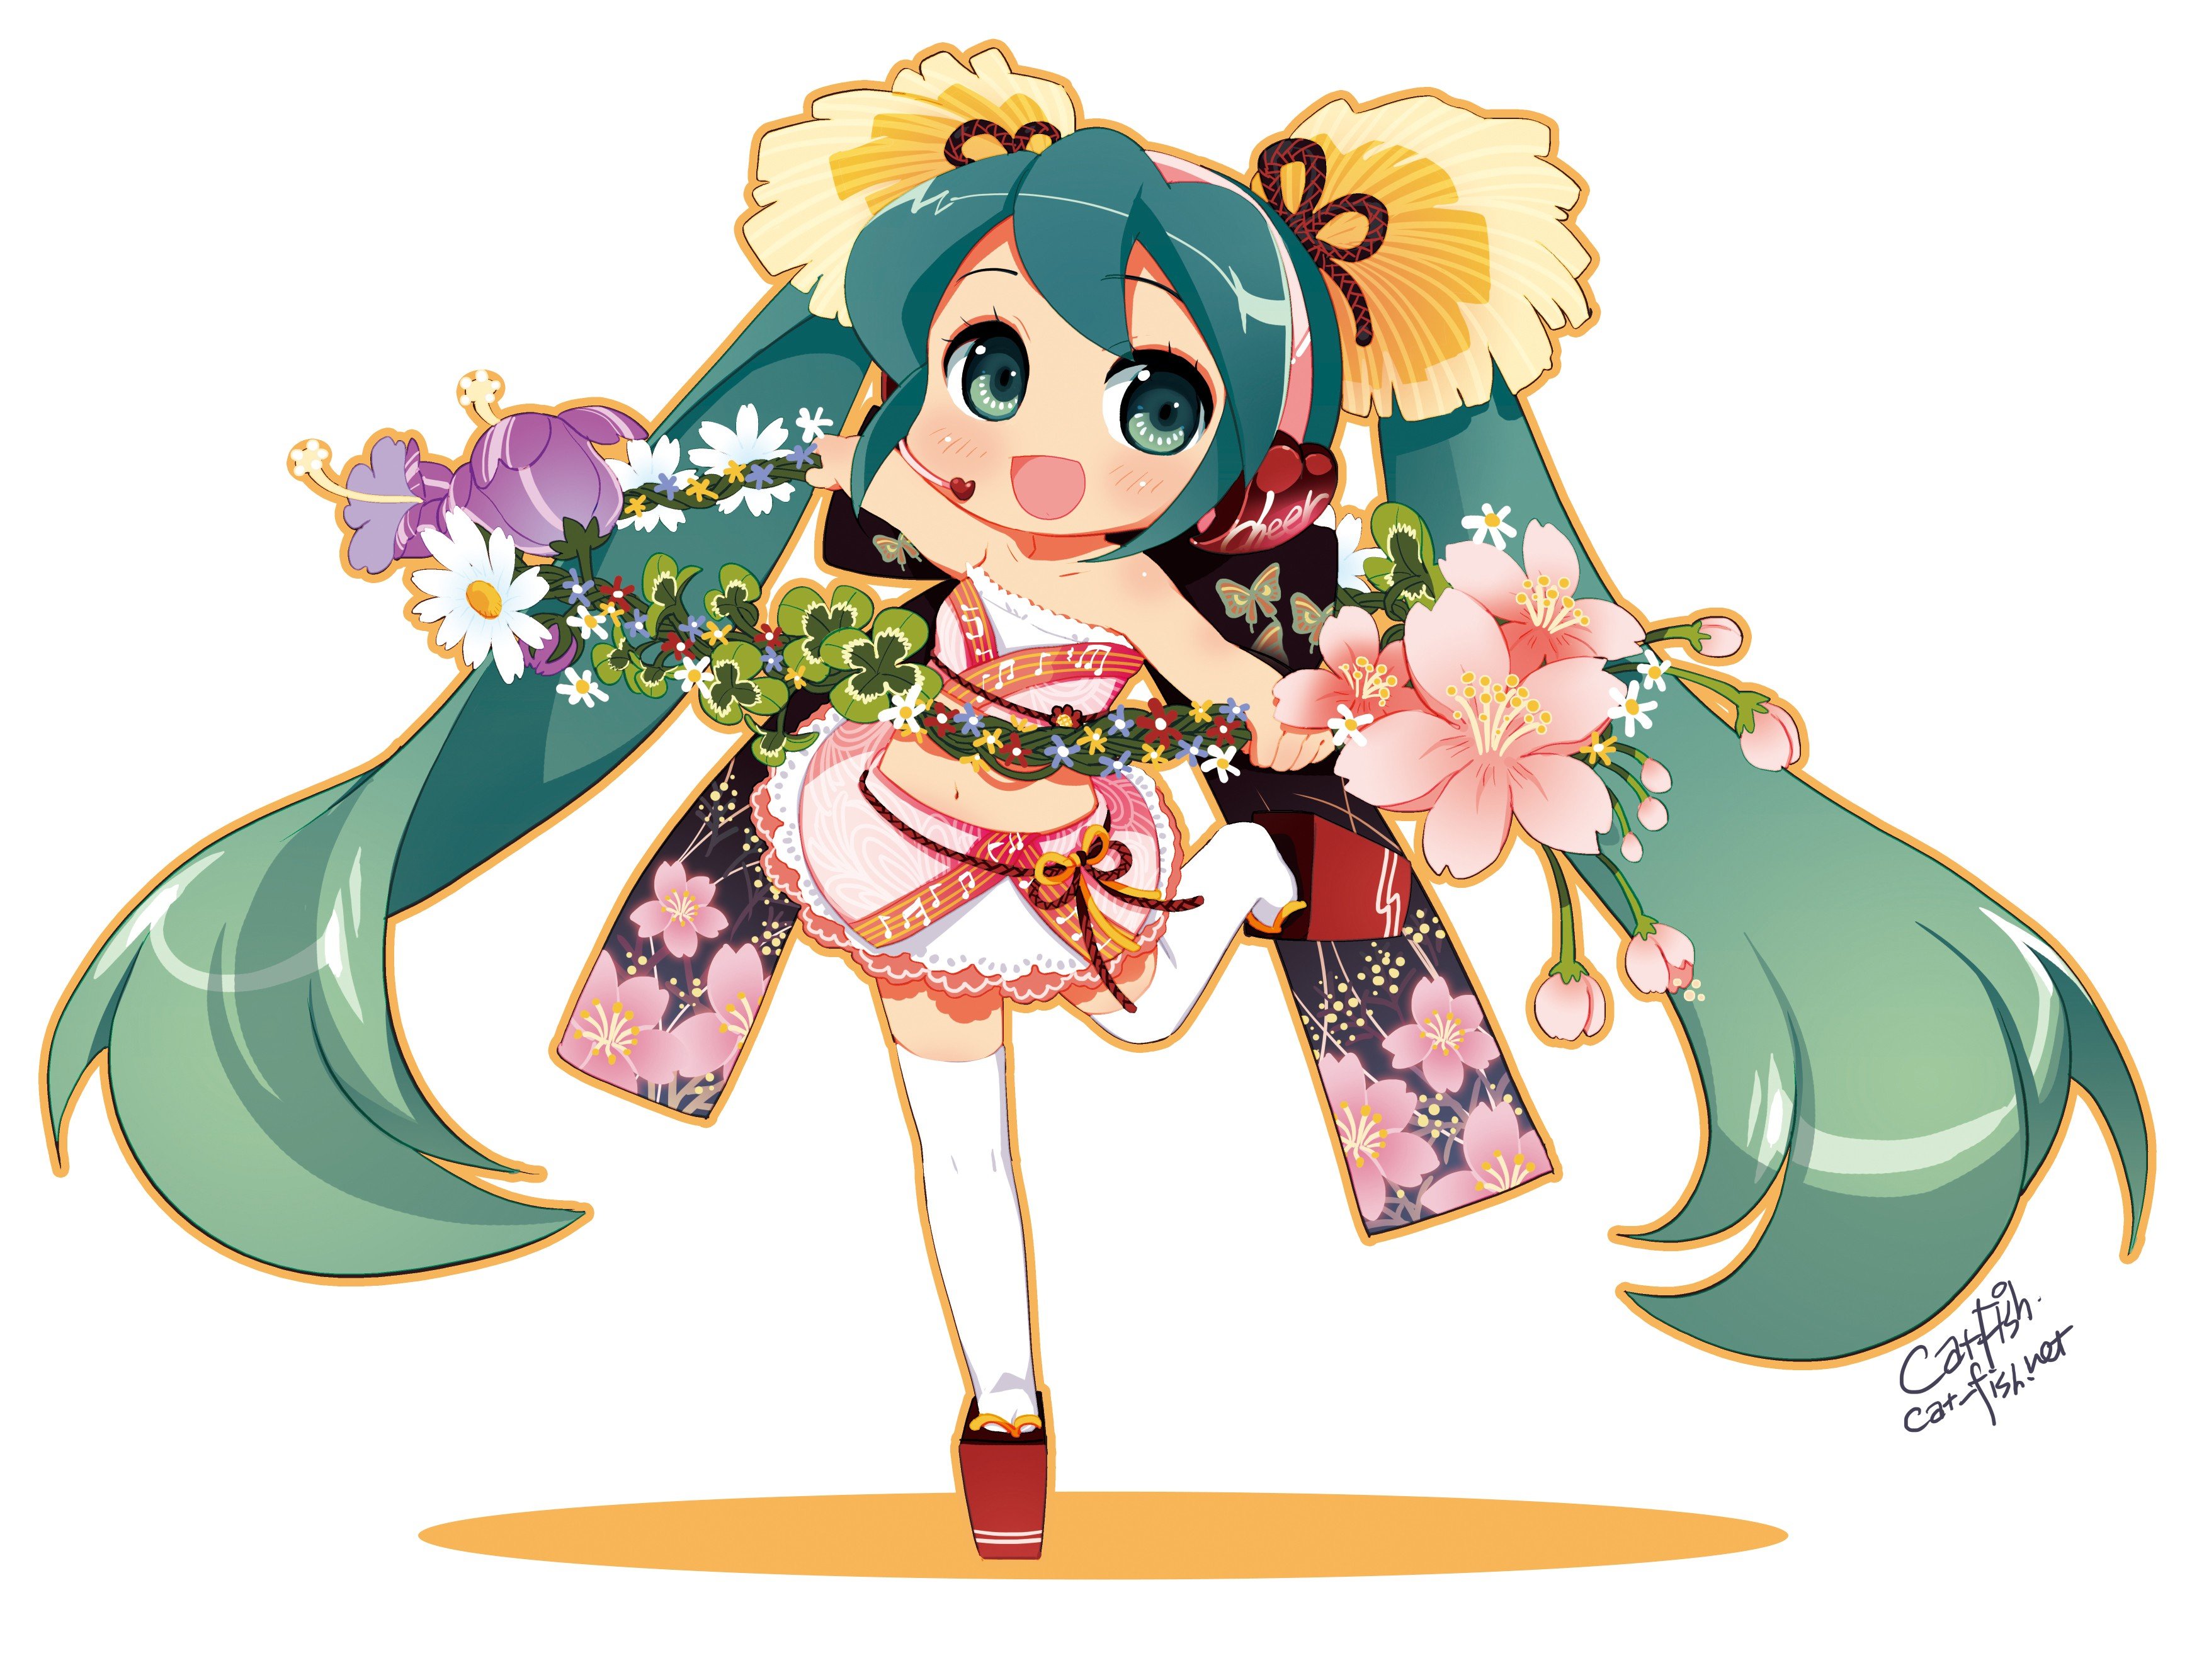 headphones, Vocaloid, Flowers, Stockings, Hatsune, Miku, Skirts, Chibi, Long, Hair, Green, Eyes, Thigh, Highs, Green, Hair, Wreath, Twintails, Blush, Open, Mouth, Sandals, Japanese, Clothes, Simple, Background, Wallpaper